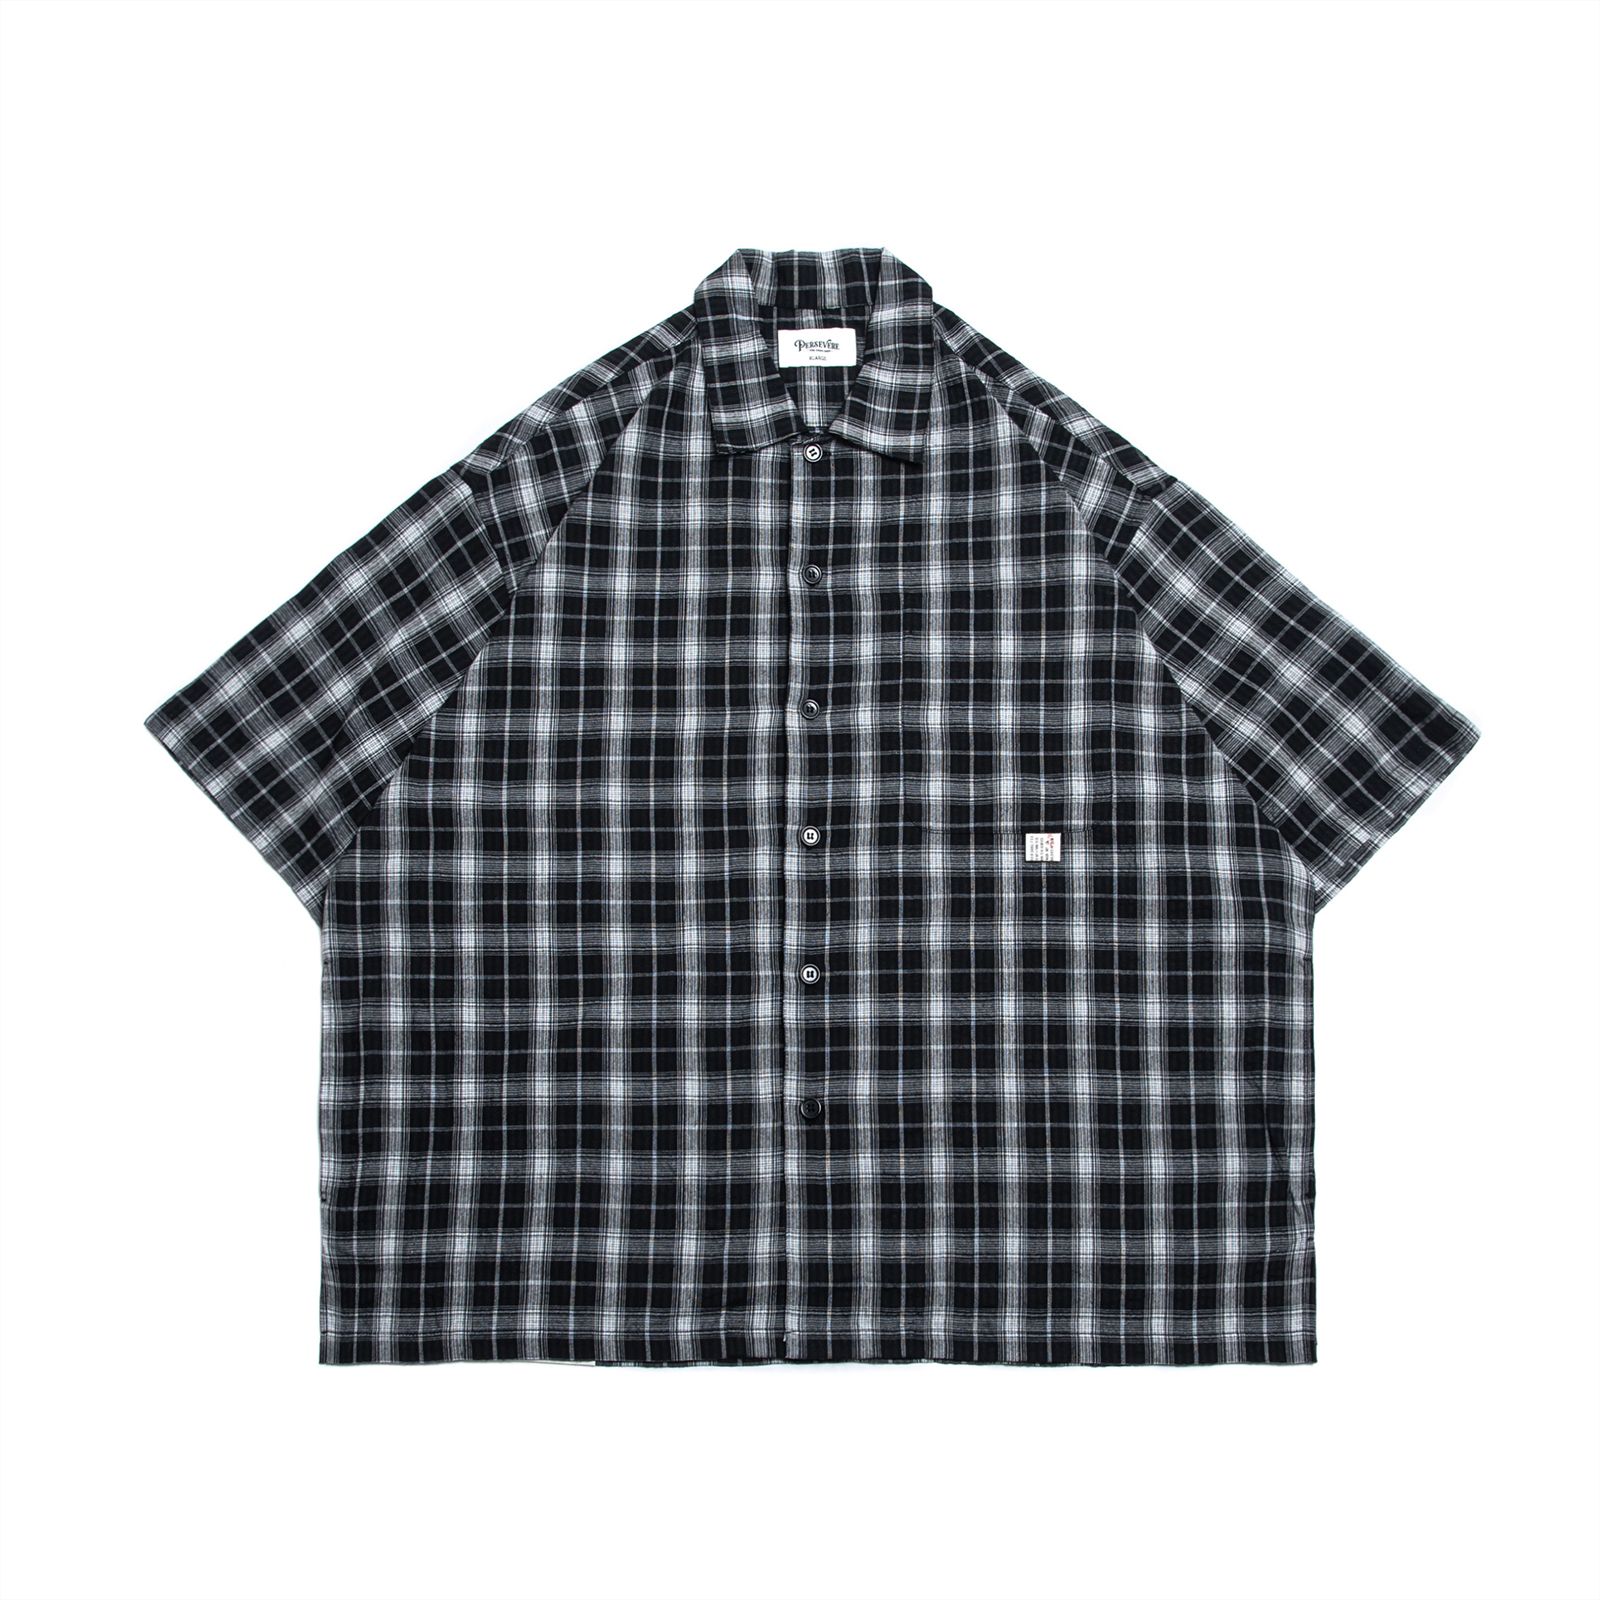 【HYSTERIC GLAMOUR X WDS】CHECK SHIRT ブラック